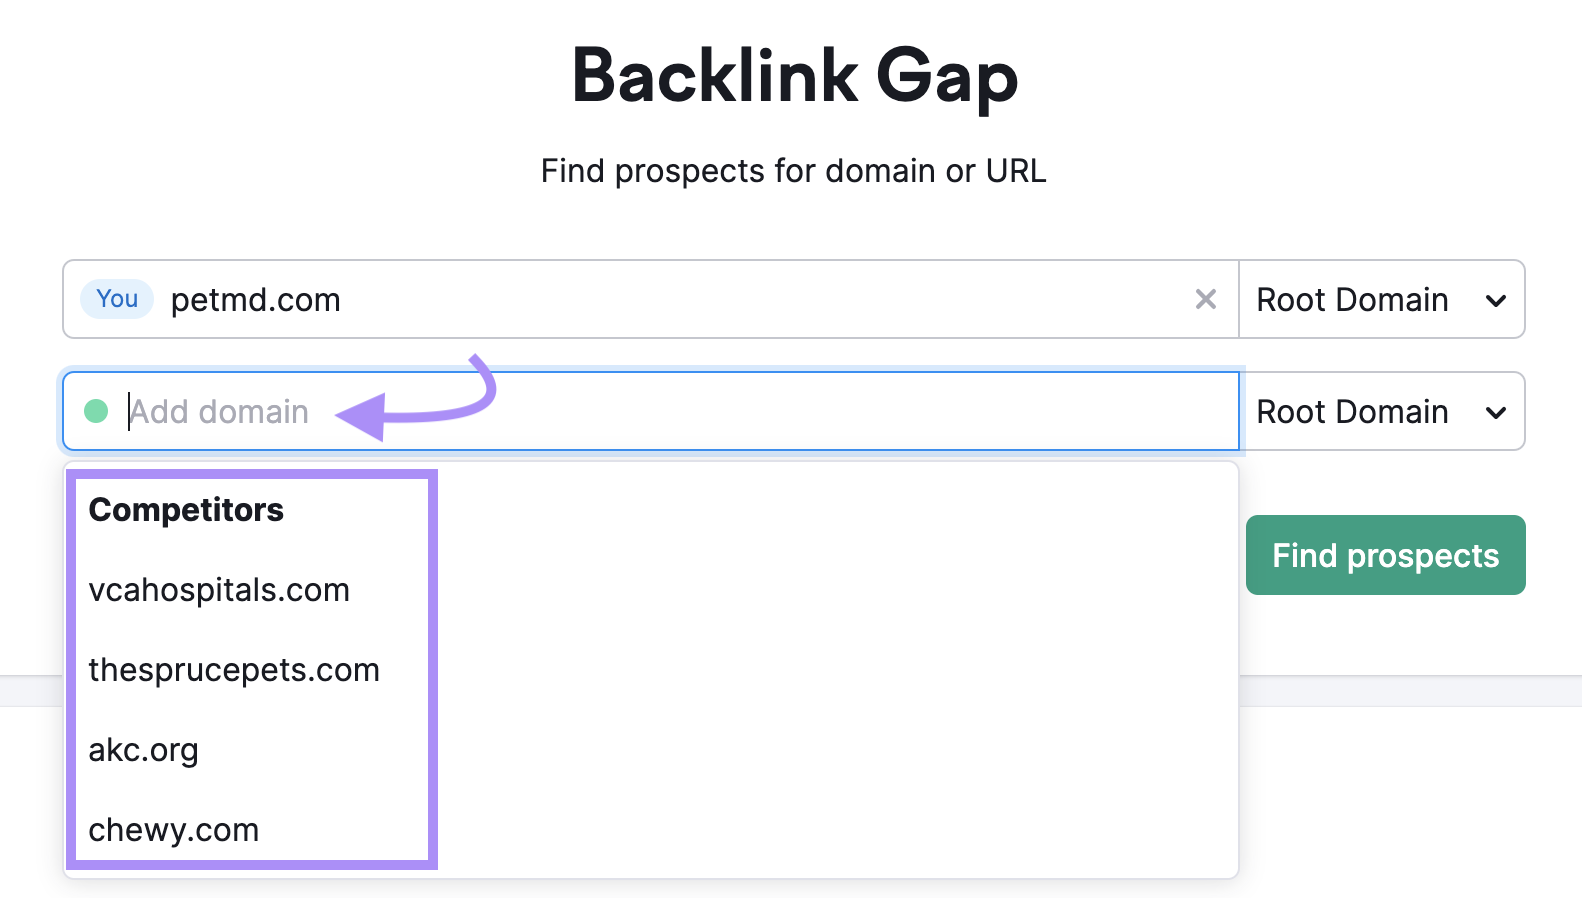 A list of "petmd.com" competitors suggested by Backlink Gap tool